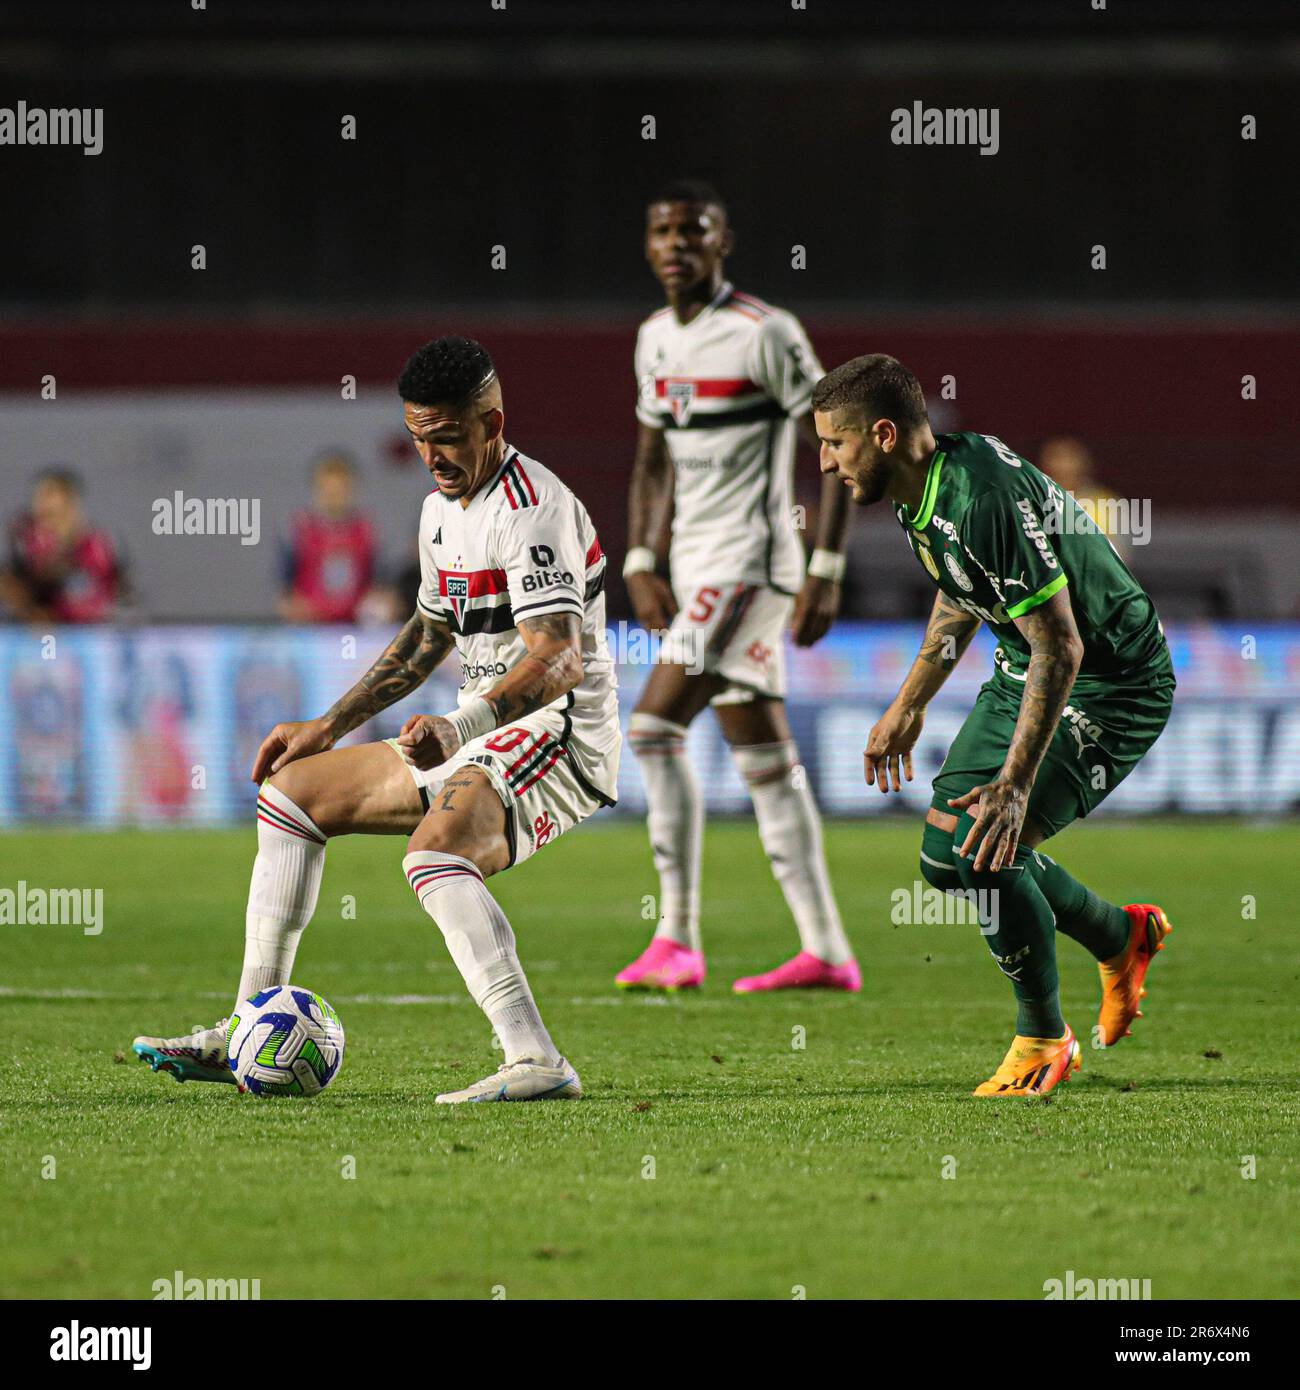 Sao Paulo, Brazil. 11th June, 2023. Luciano of Sao Paulo battles for possession with Ze Rafael of Palmeiras, during the match between Sao Paulo and Palmeiras, for the Brazilian Serie A 2023, at Morumbi Stadium, in Sao Paulo on June 11. Photo: Wanderson Oliveira/DiaEsportivo/Alamy Live News Credit: DiaEsportivo/Alamy Live News Stock Photo